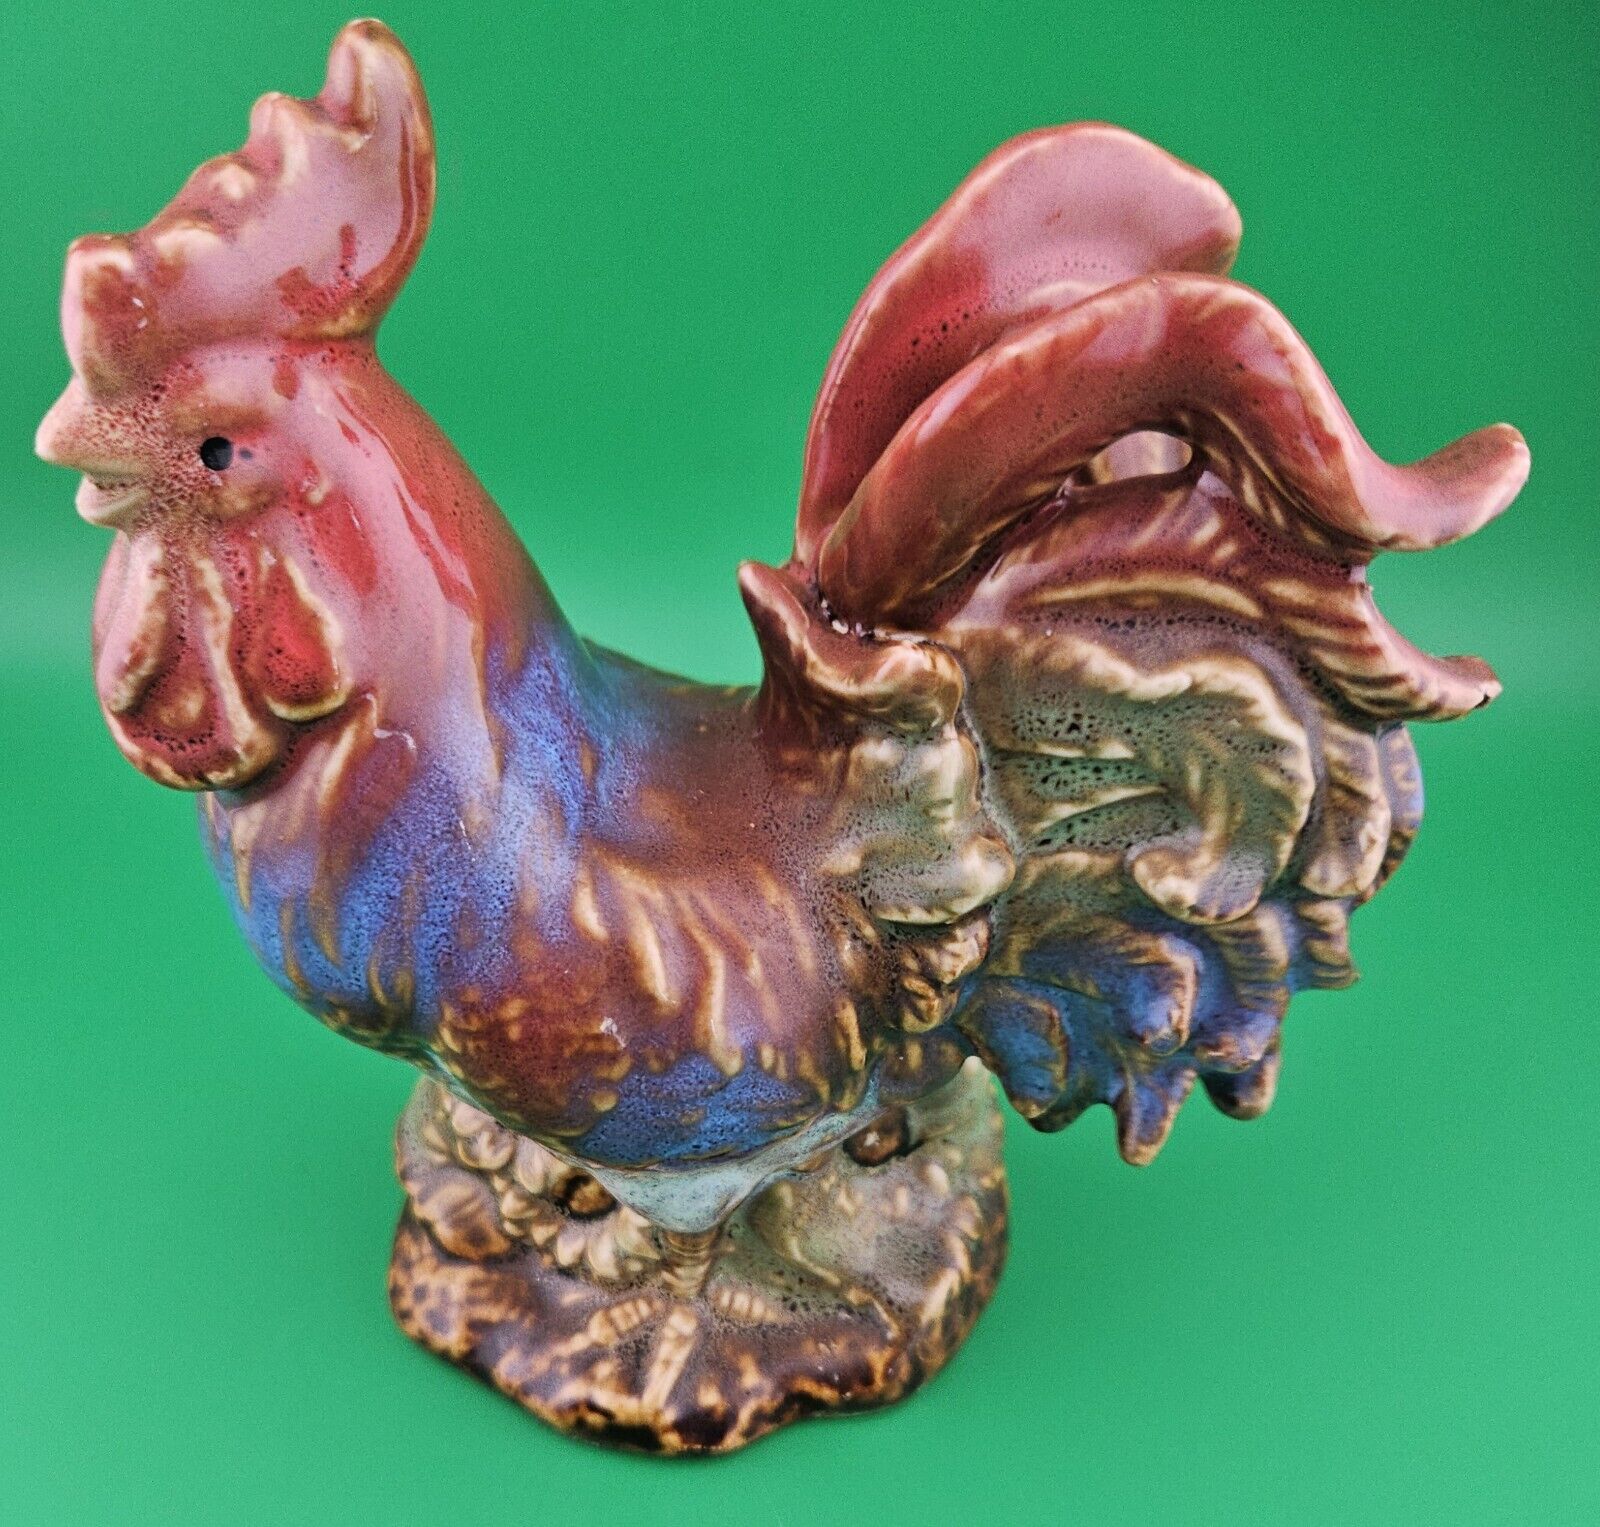 Ceramic- Vintage Ceramic Pottery Rooster Farmhouse/Country